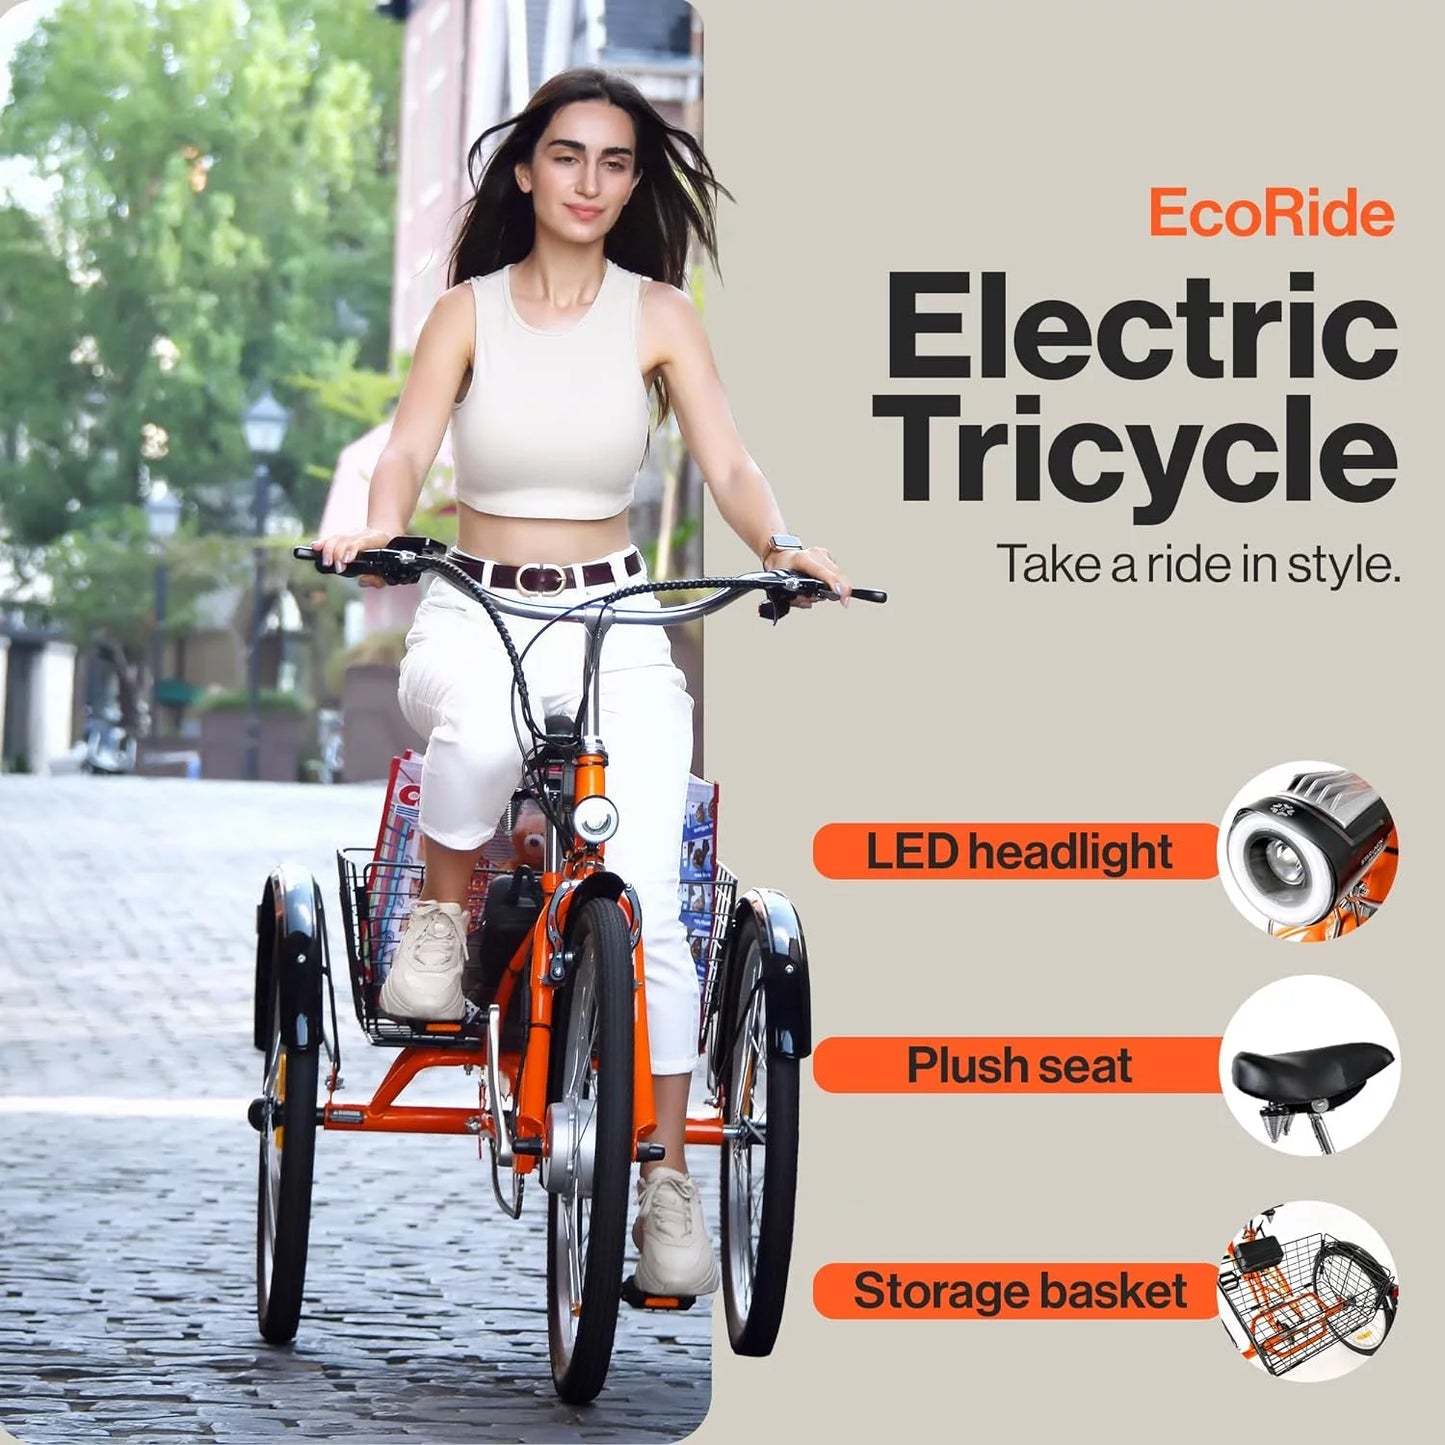 SuperHandy Adult Tricycle Electric Bike - EcoRide 3 Modes, Adaptive Pedal Assist Torque Sensor, 250W Motor, Lithium Battery, 330LB Capacity, Large Storage Basket, LED Headlight, LCD Display